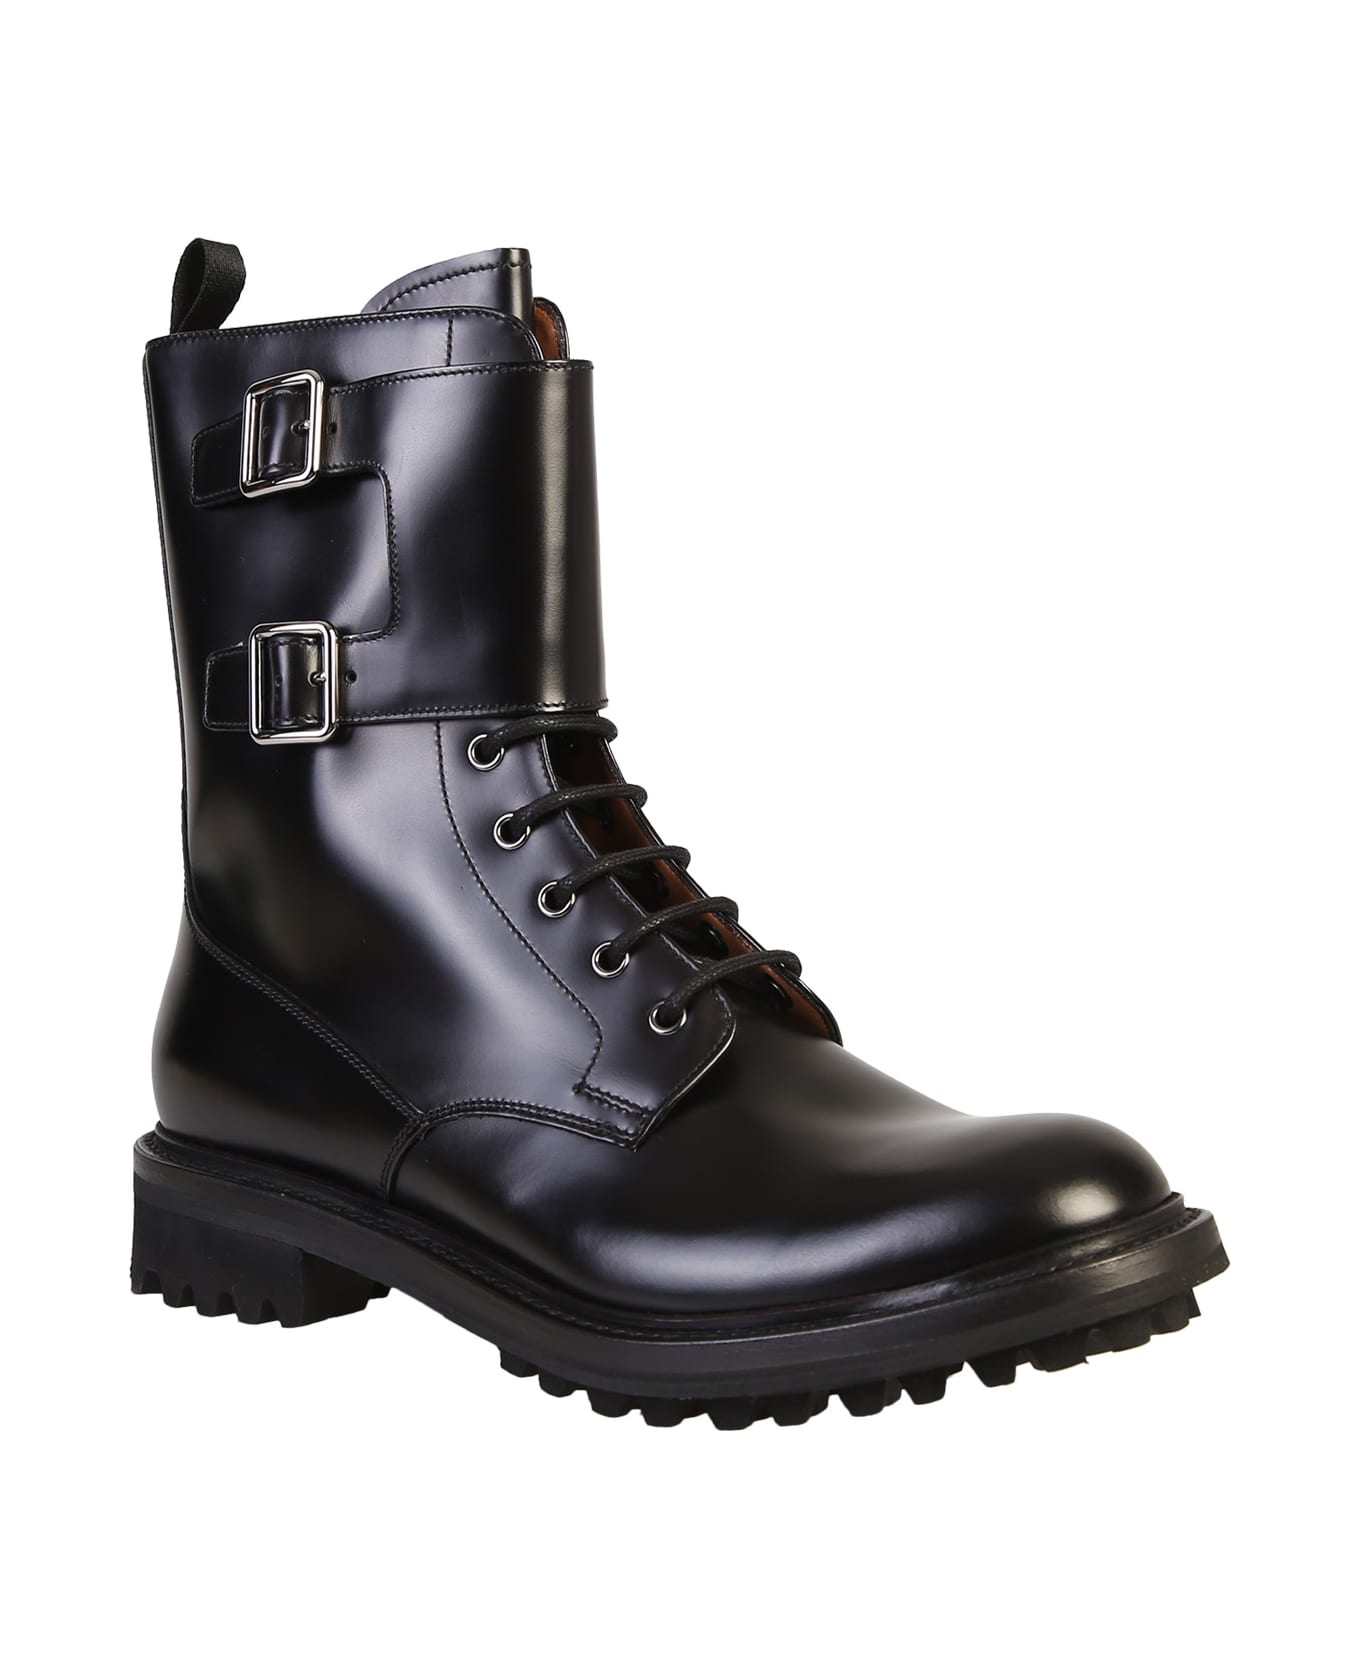 Church's Lace Up Boots - Black ブーツ